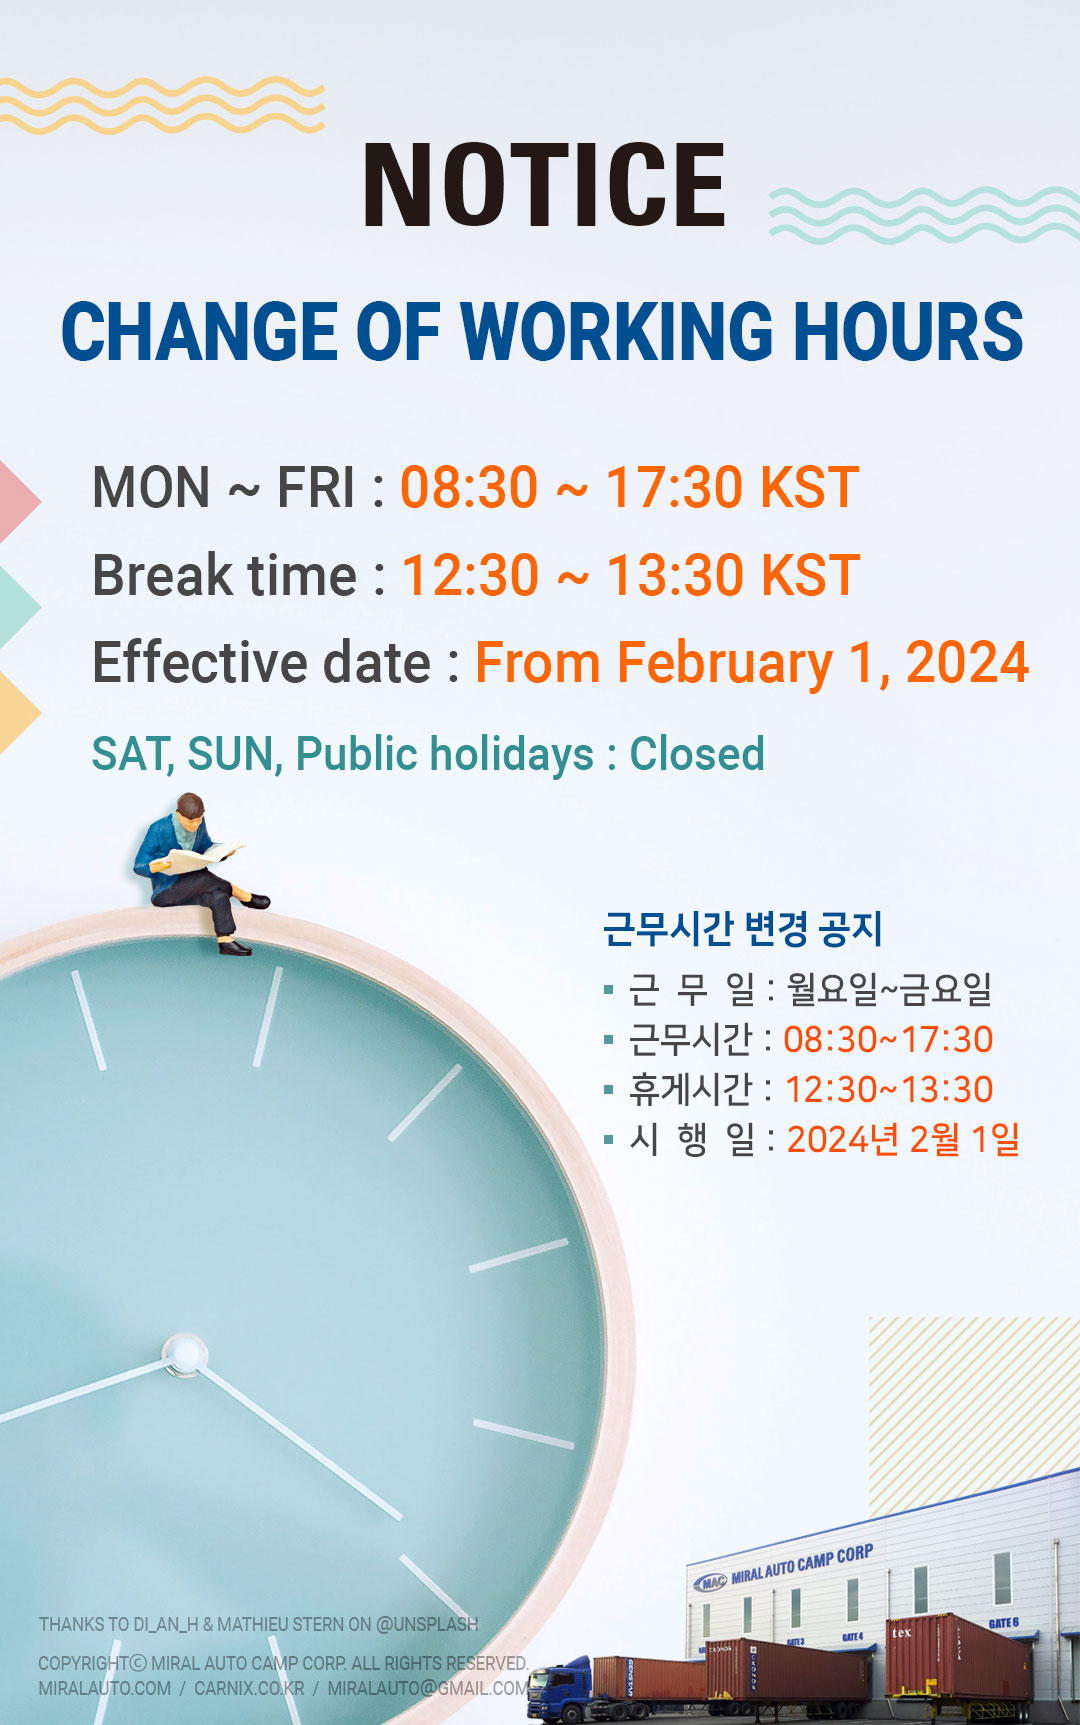 Change of working hours - Working hours : 08:30~17:30 KST,  Break time : 12:30~13:30 KST,  Effective date :  From February 1, 2024